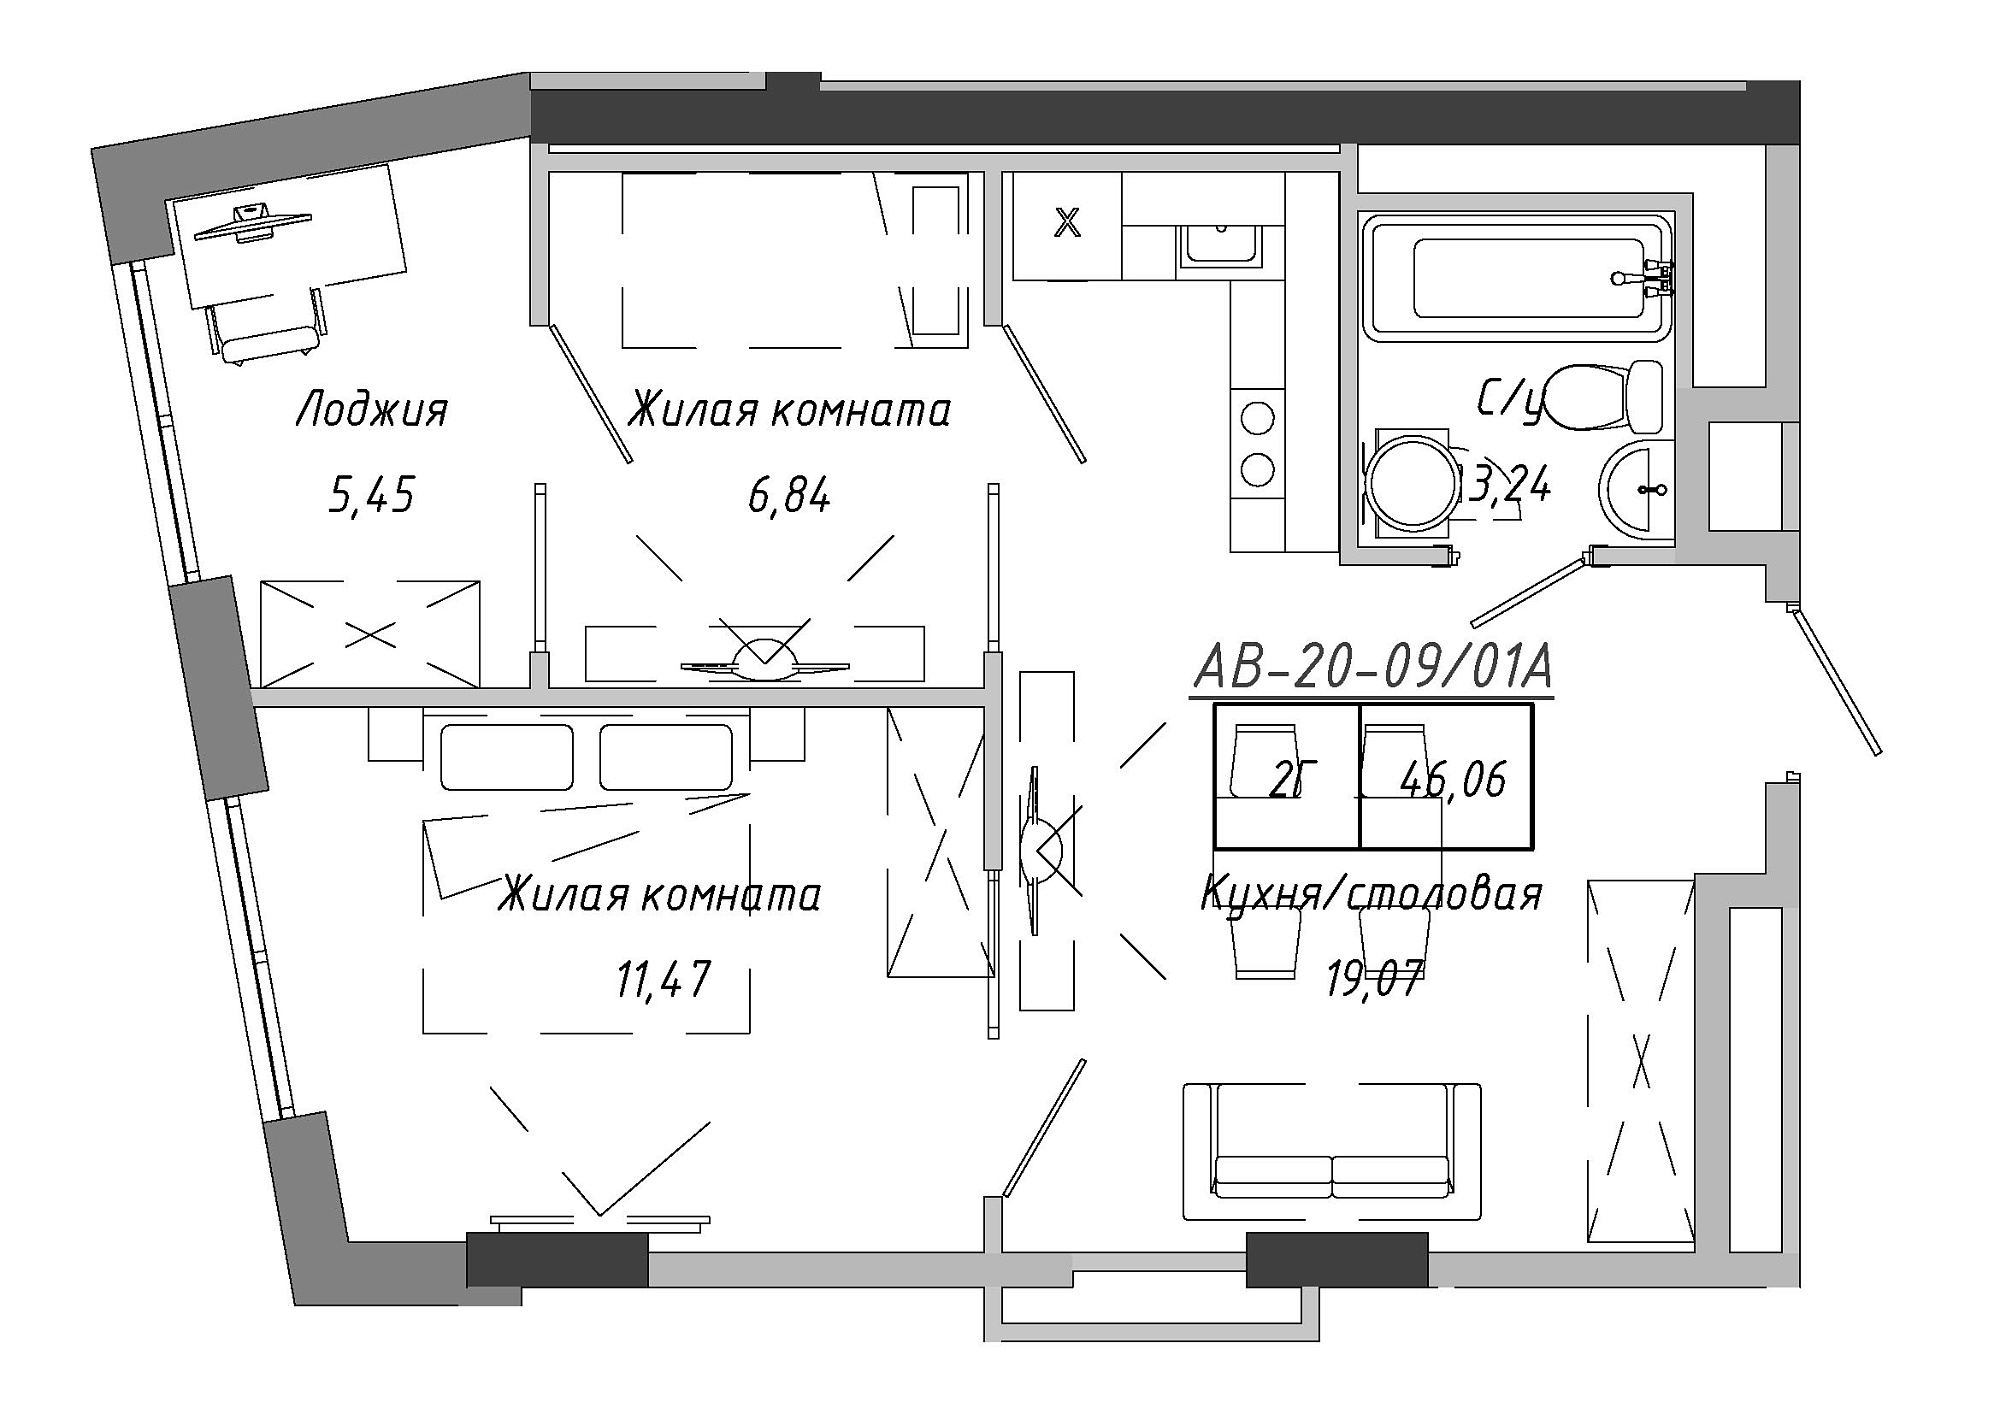 Planning 2-rm flats area 45.99m2, AB-20-09/0001а.